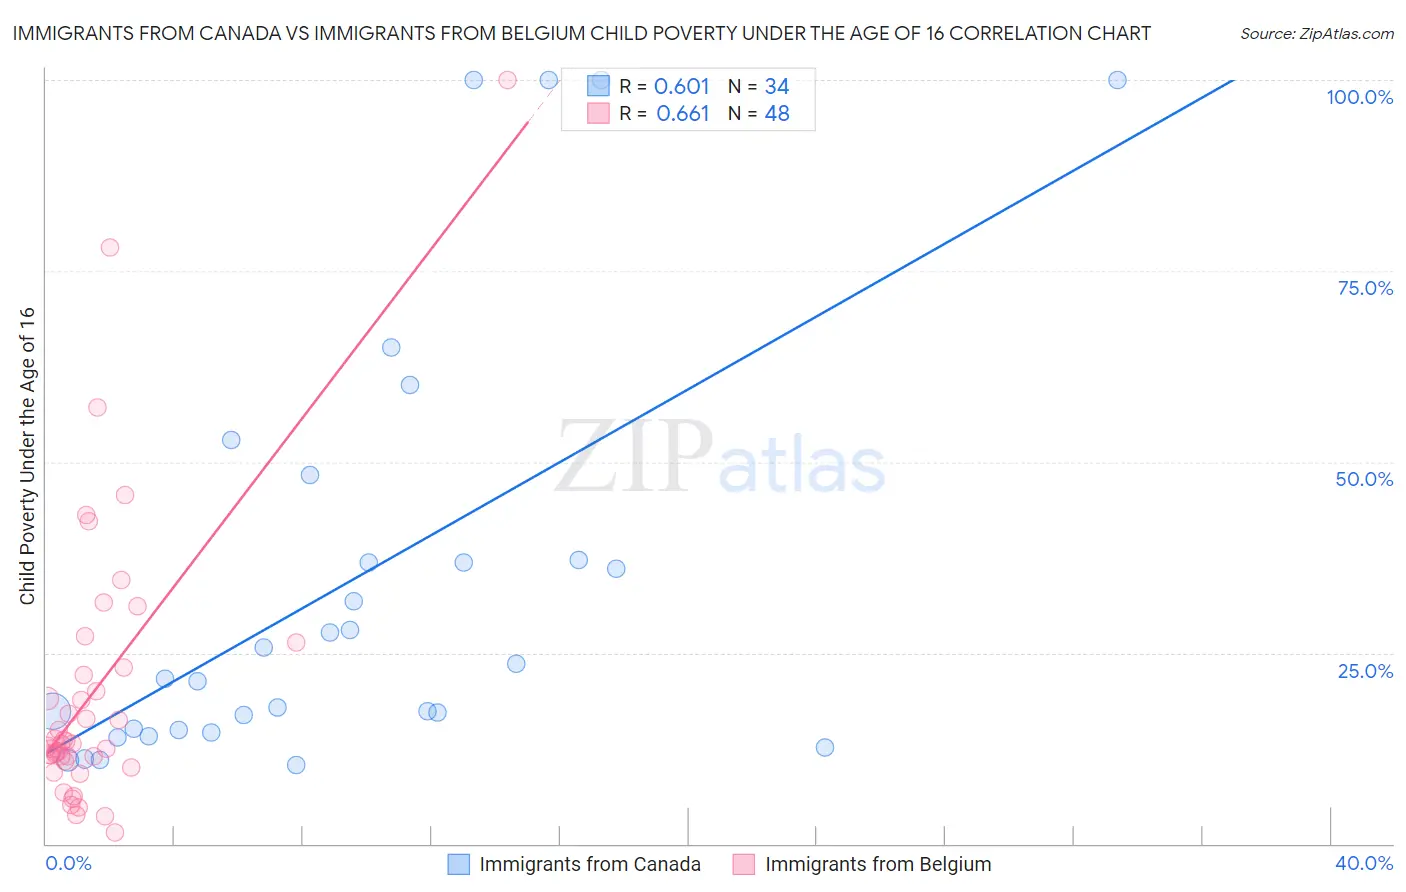 Immigrants from Canada vs Immigrants from Belgium Child Poverty Under the Age of 16